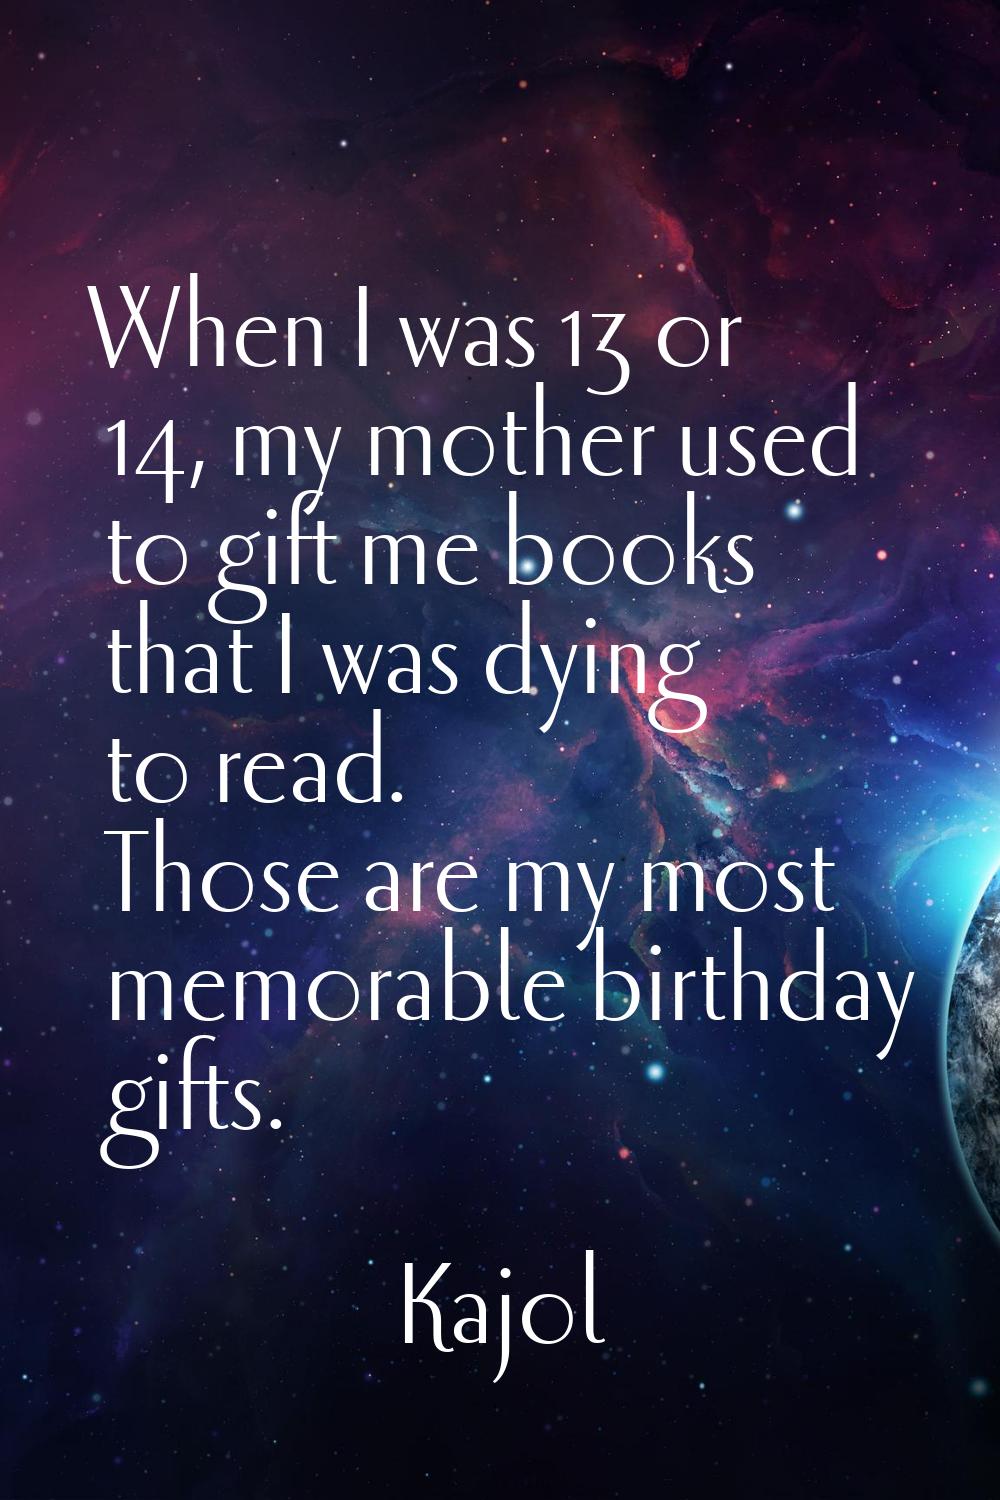 When I was 13 or 14, my mother used to gift me books that I was dying to read. Those are my most me